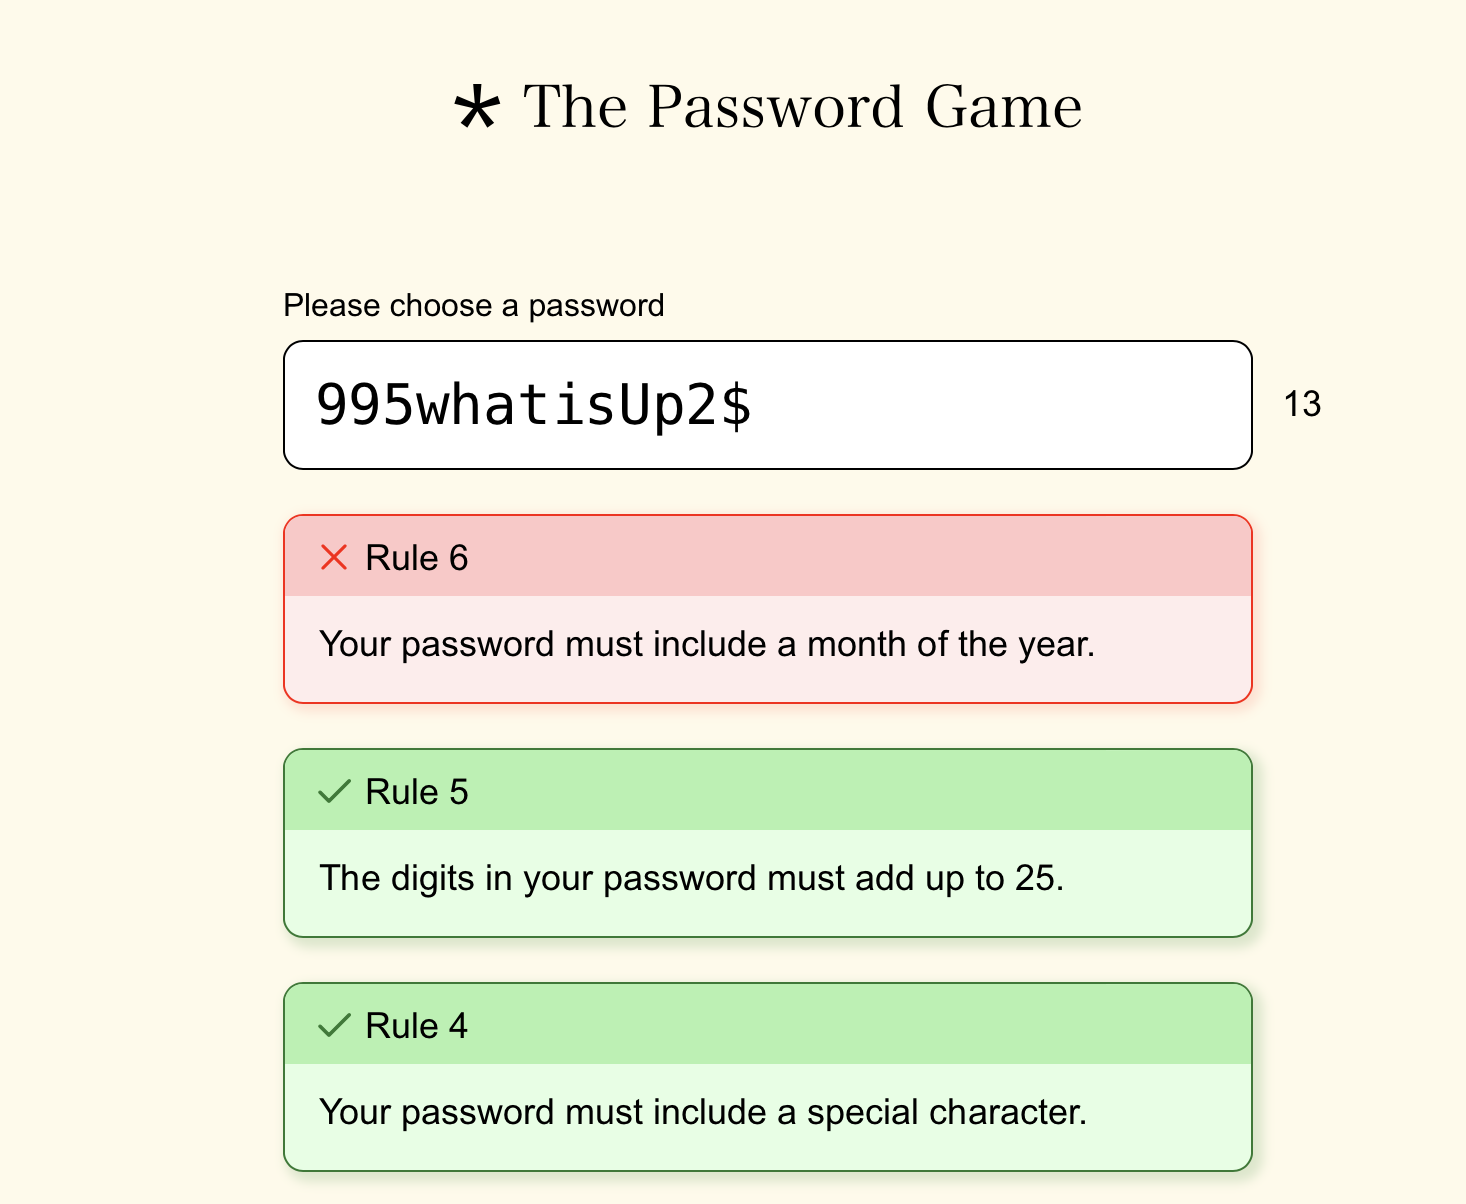 Password game requires more ridiculous rules as you play FlowingData